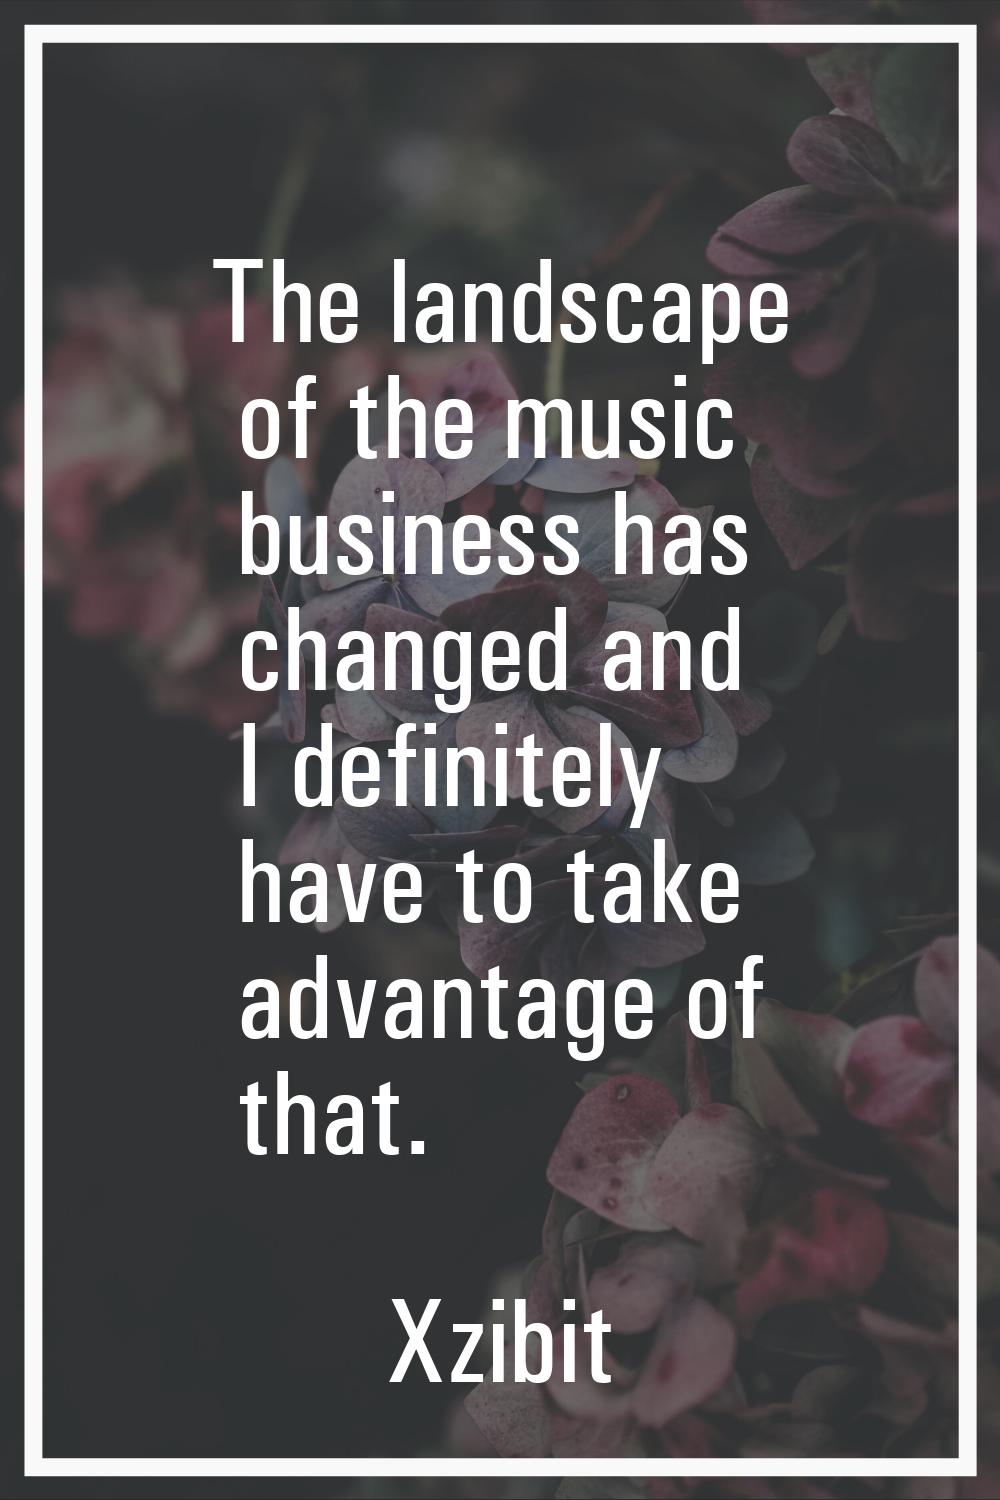 The landscape of the music business has changed and I definitely have to take advantage of that.